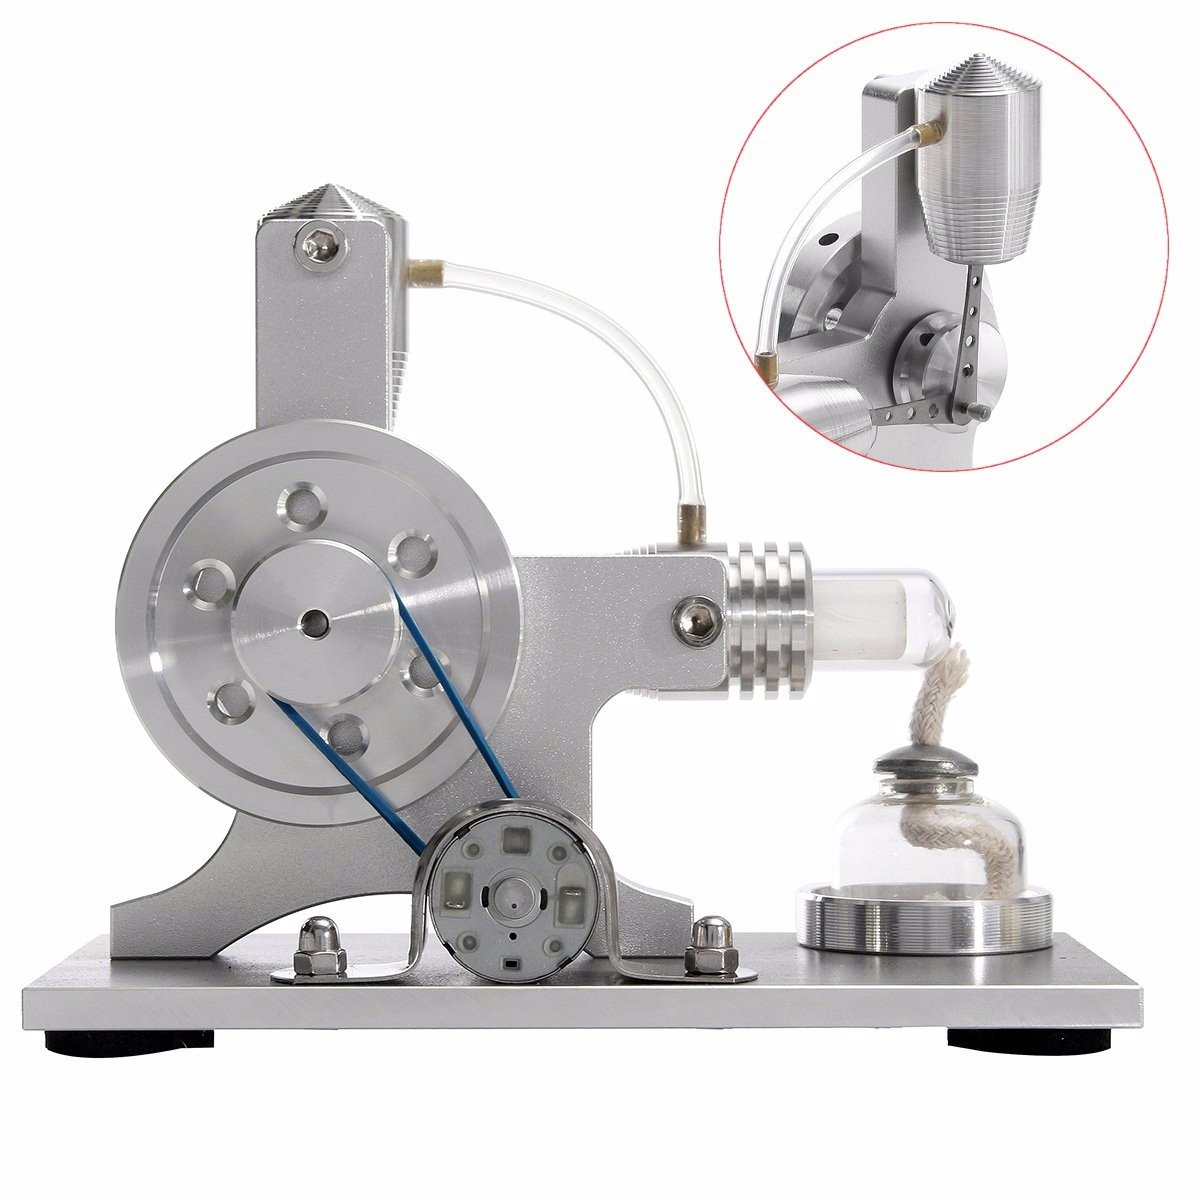 Stirling Engine Model Physical Motor Power Generator External Combustion Educational Toy 2